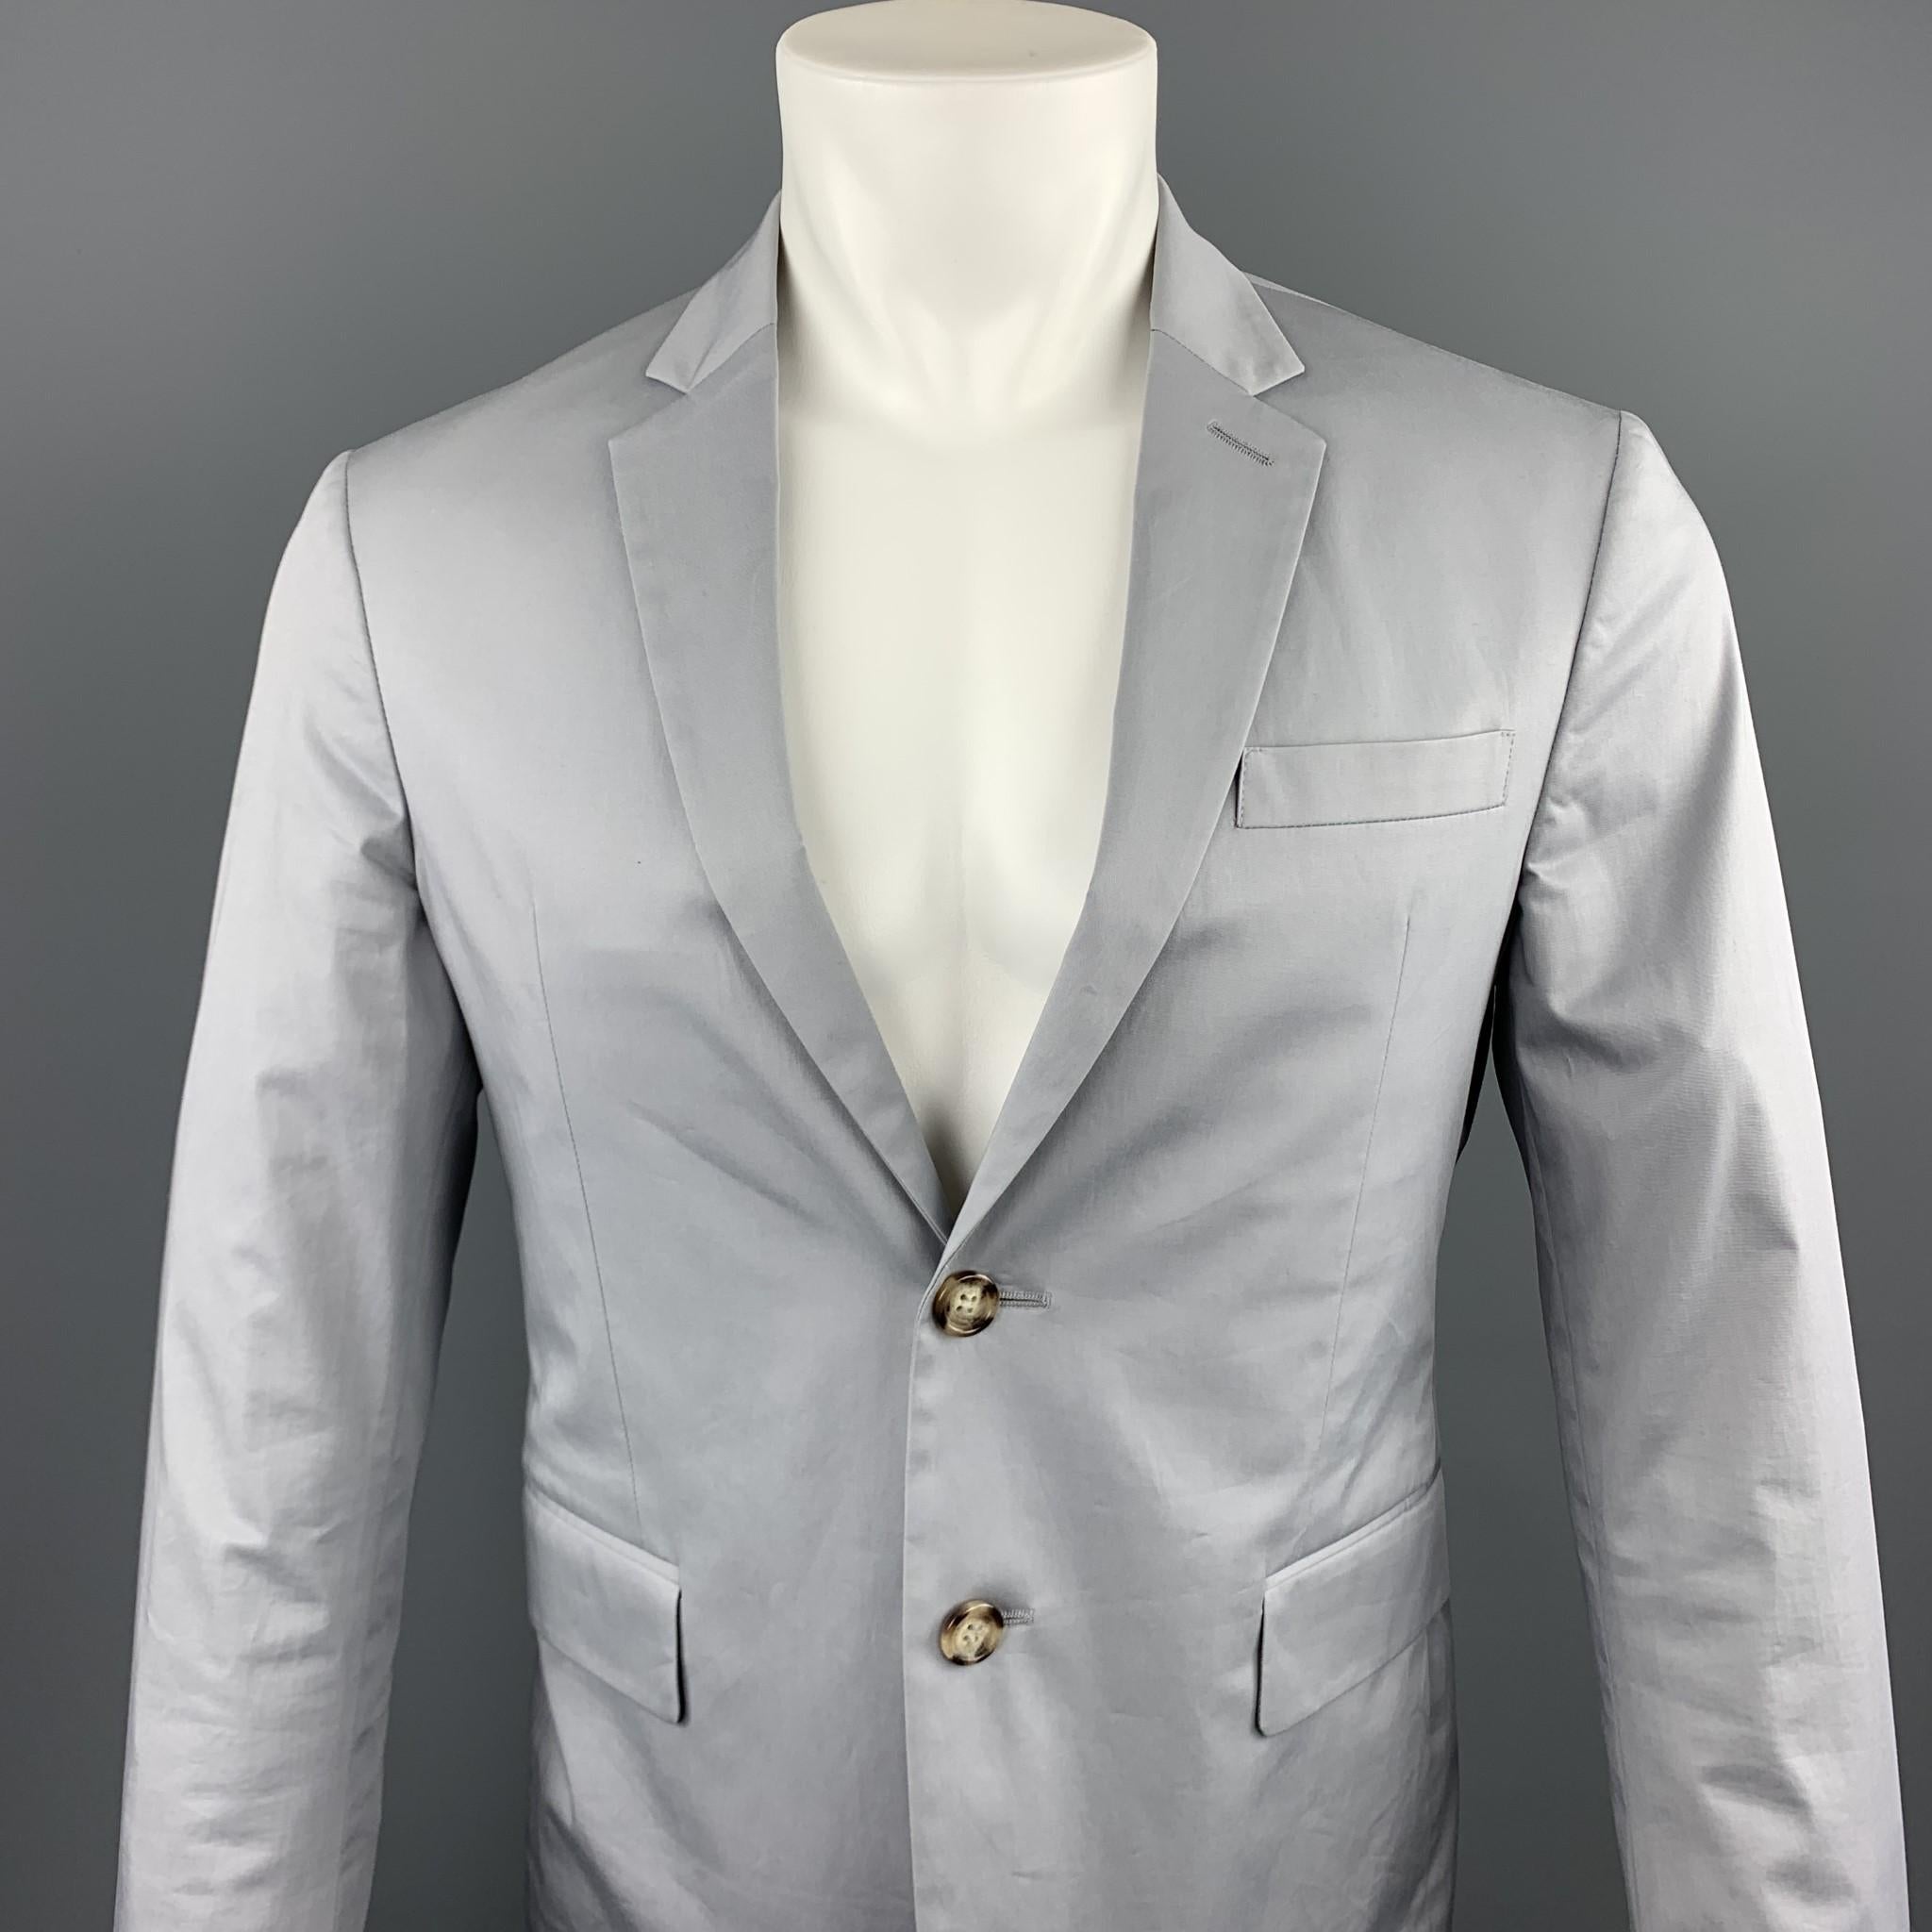 PRADA sport coat comes in a light gray cotton featuring a notch lapel, patch pockets, and a two button closure. 

Excellent Pre-Owned Condition.
Marked: 48

Measurements:

Shoulder: 16.5 in.
Chest: 38 in.
Sleeve: 26 in.
Length: 28 in.  